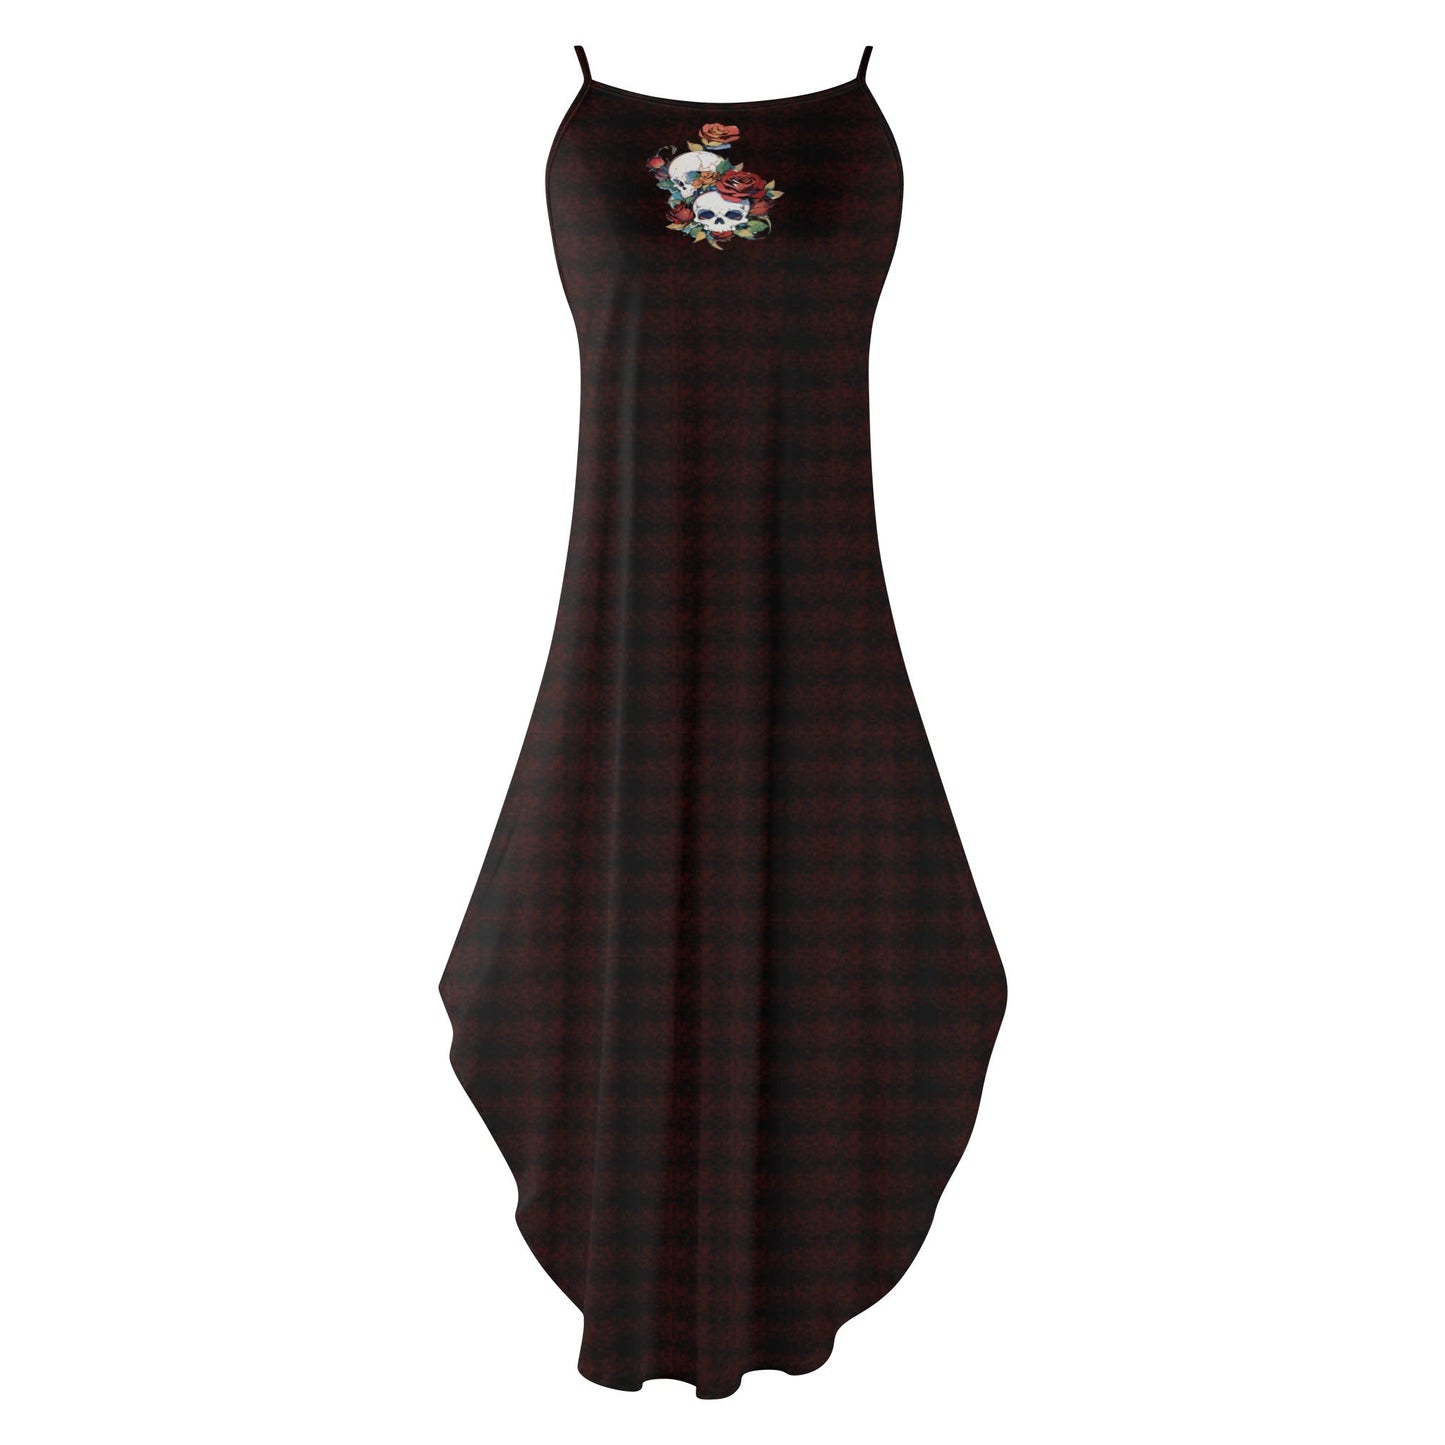 Stand out  with the  Rose & Skull Sleeveless Party Dress  available at Hey Nugget. Grab yours today!